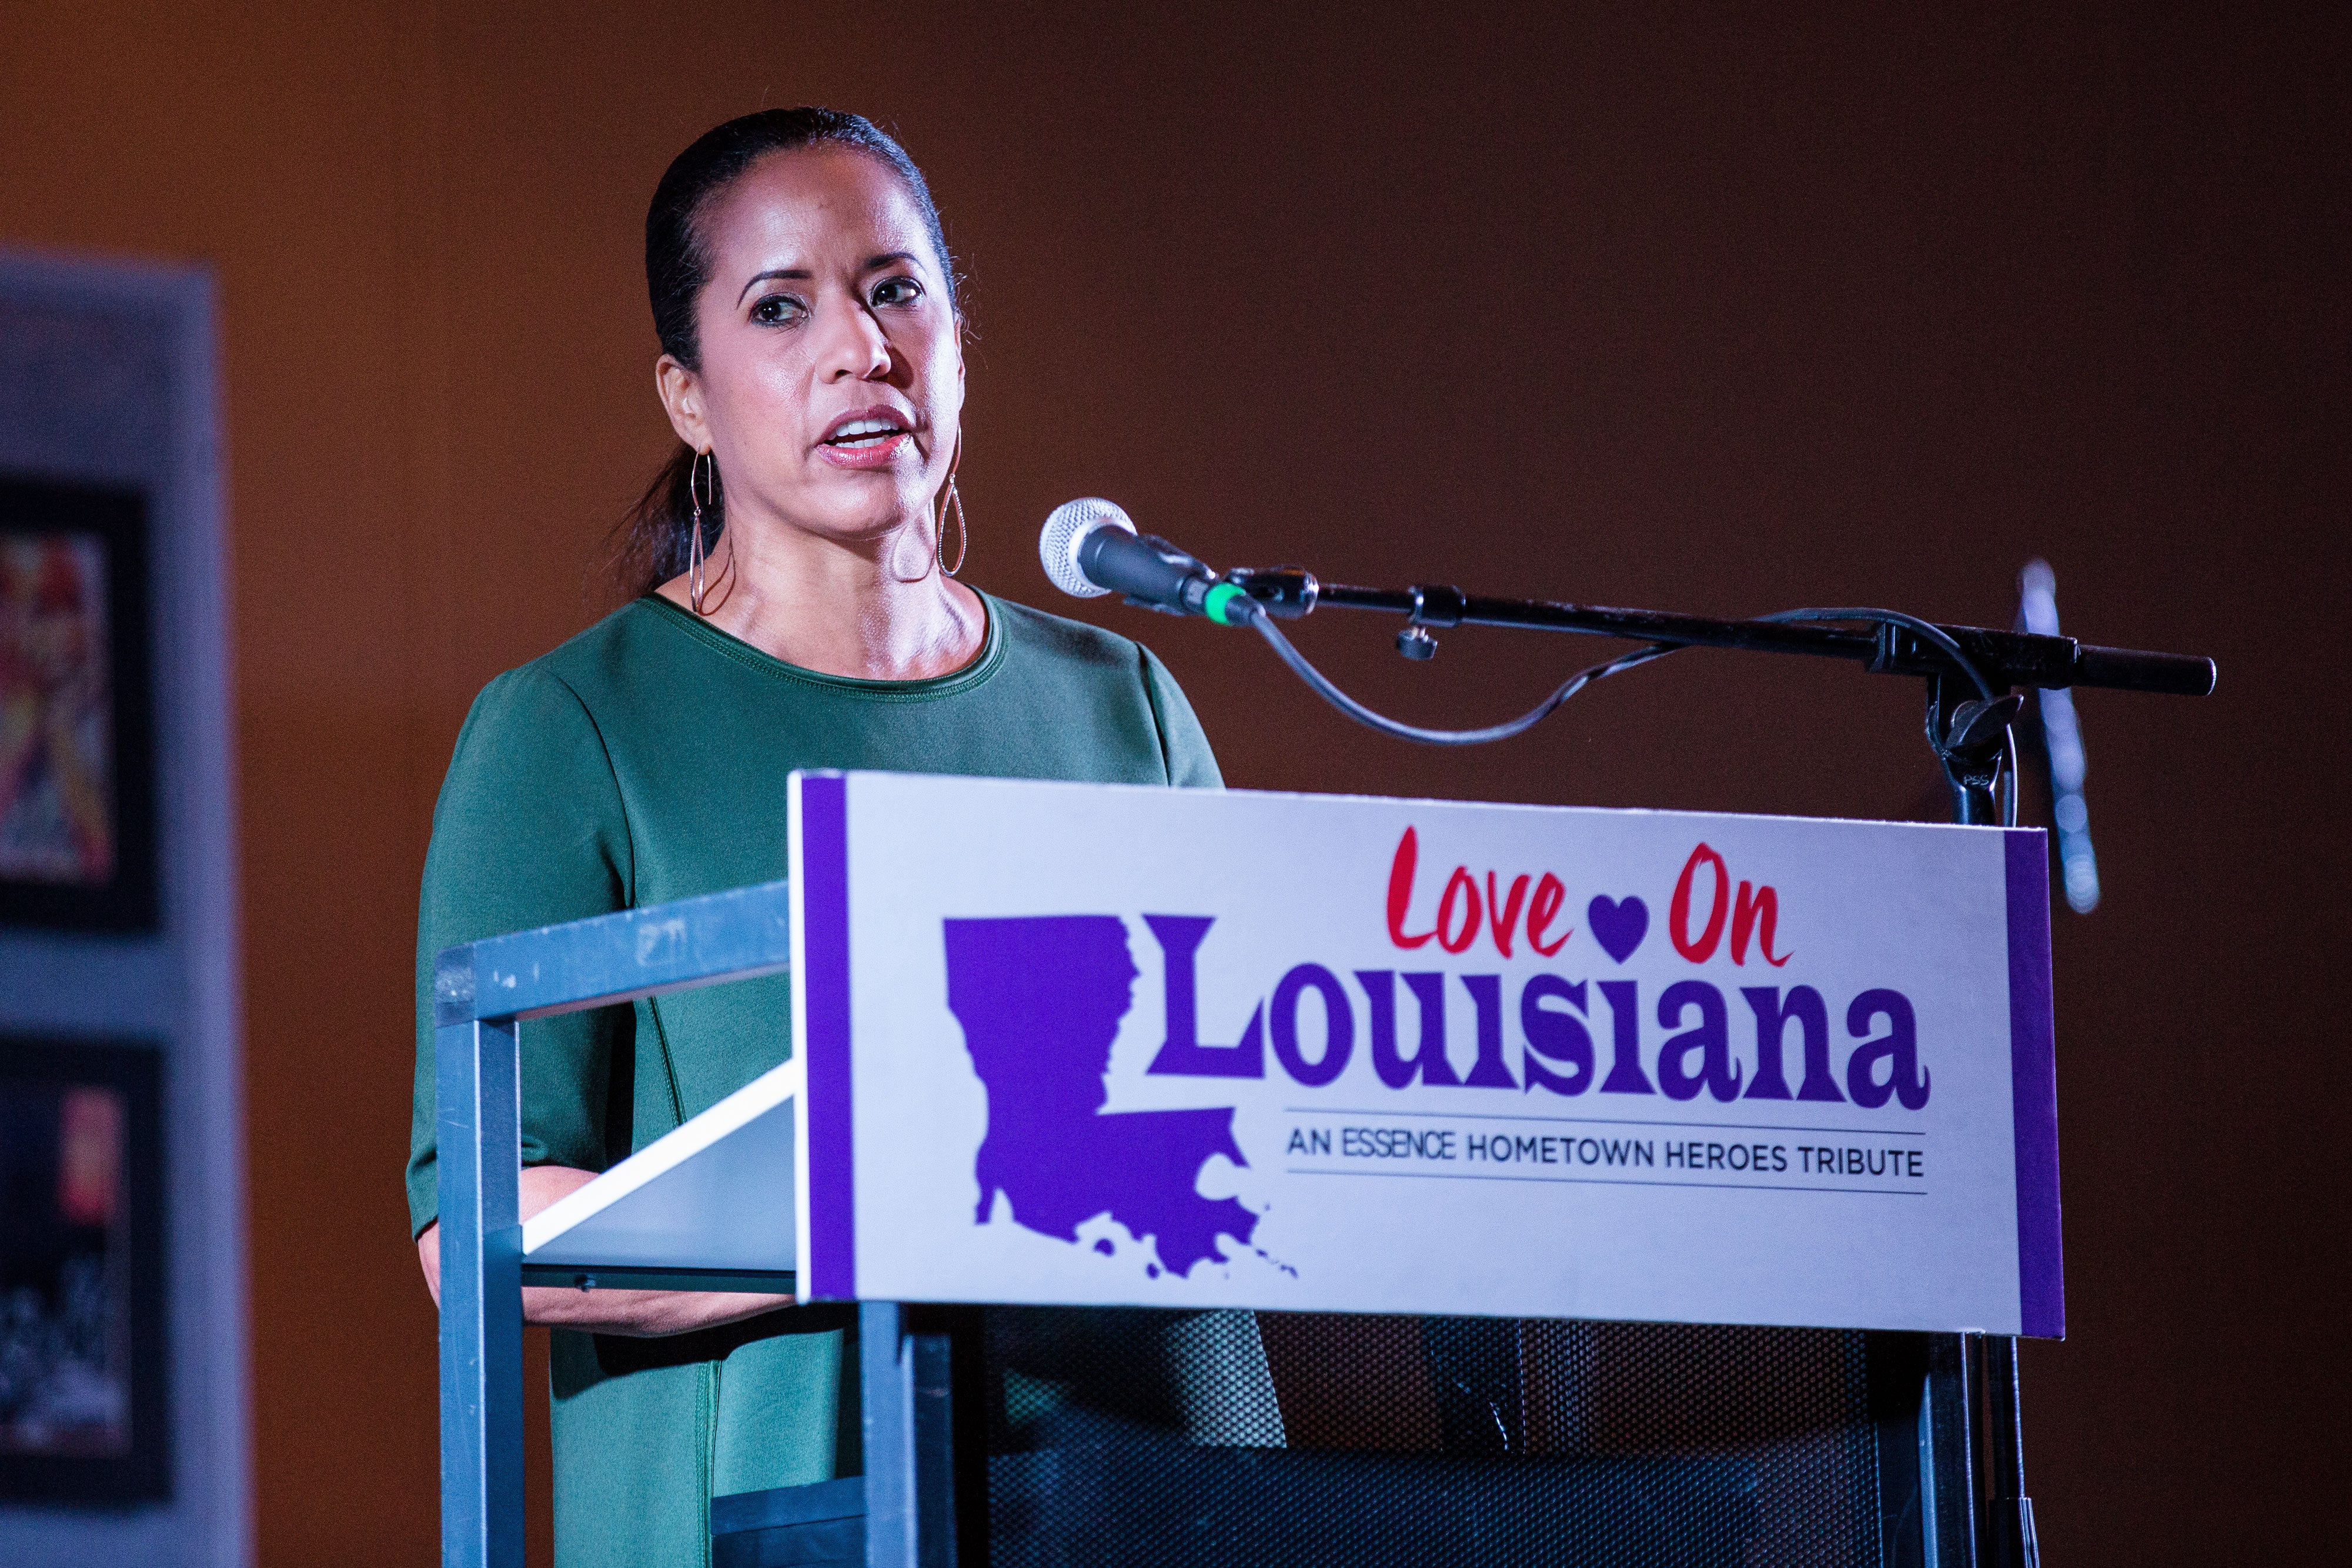 ESSENCE and Tina Knowles-Lawson Honor Baton Ruge Hometown Heroes At 'Love on Louisiana' Event
